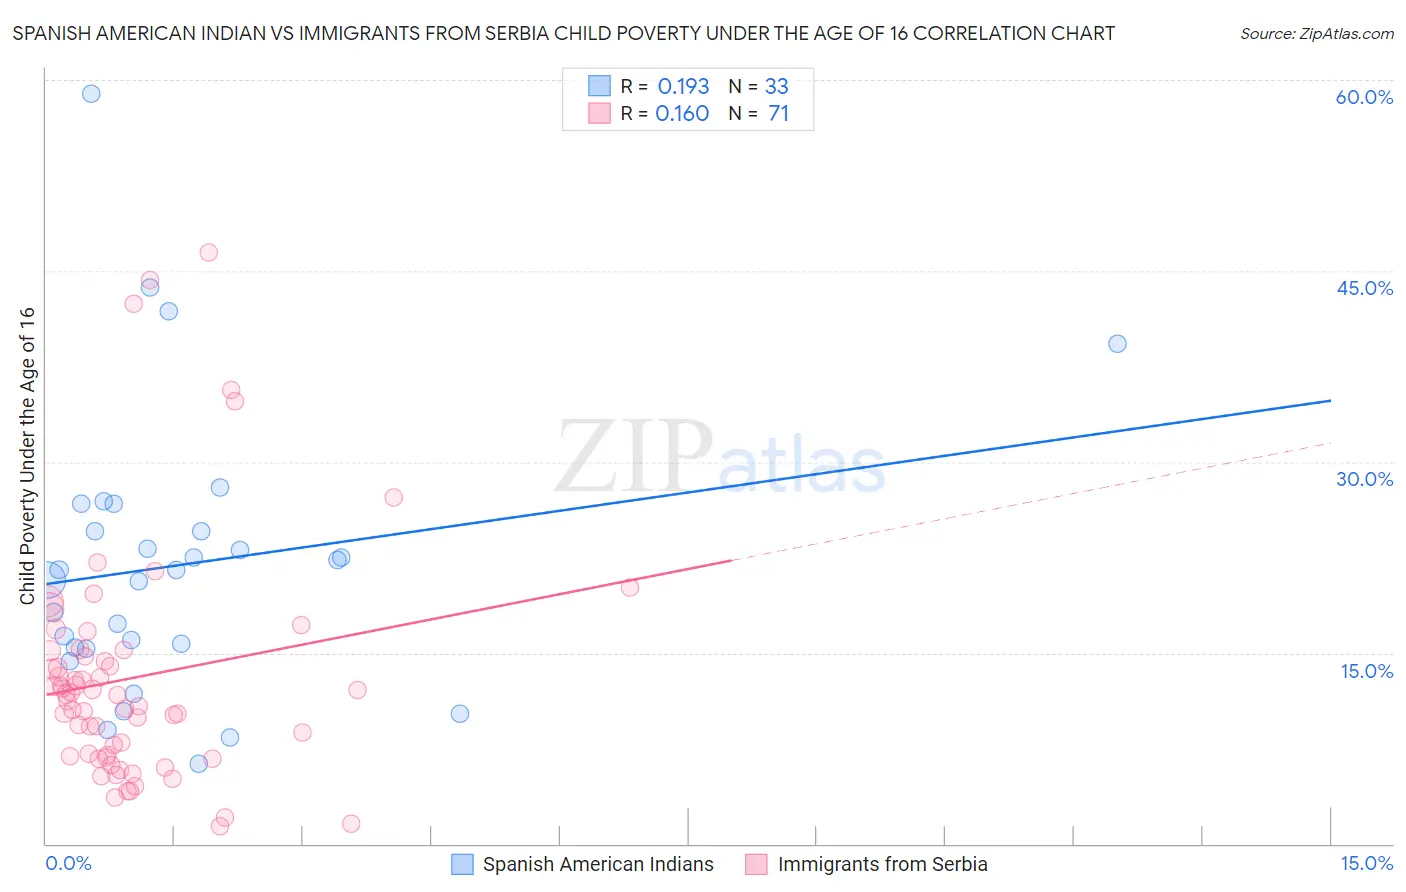 Spanish American Indian vs Immigrants from Serbia Child Poverty Under the Age of 16